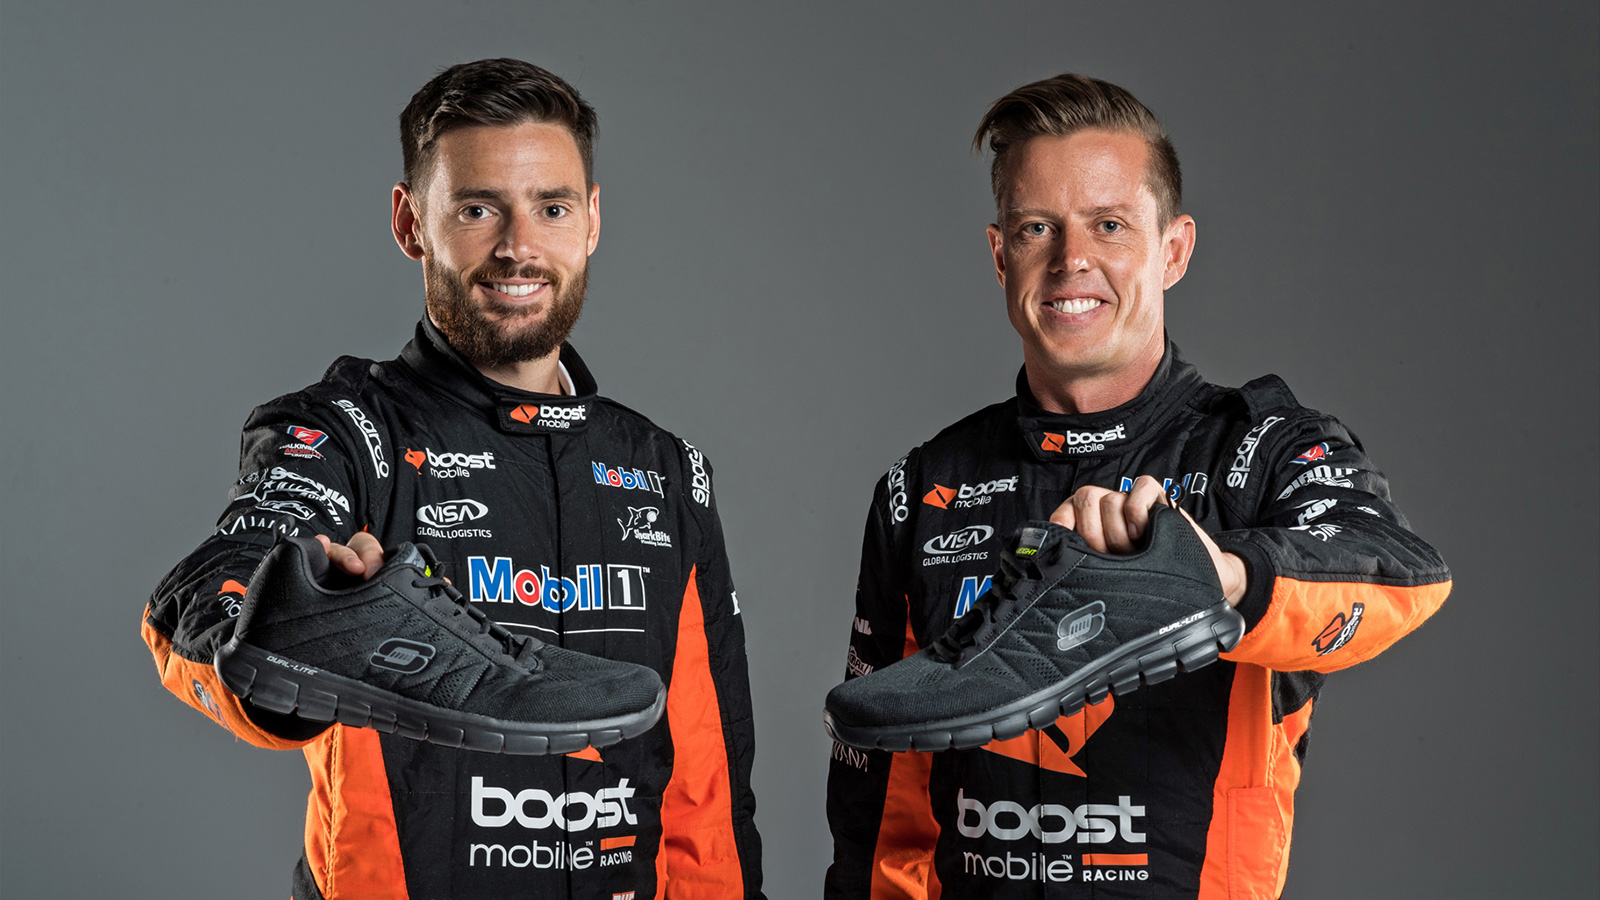 Warren Luff and Jack Perkins will return to the team as co-drivers for the the 2018 Virgin Australia Supercars Championship endurance season.